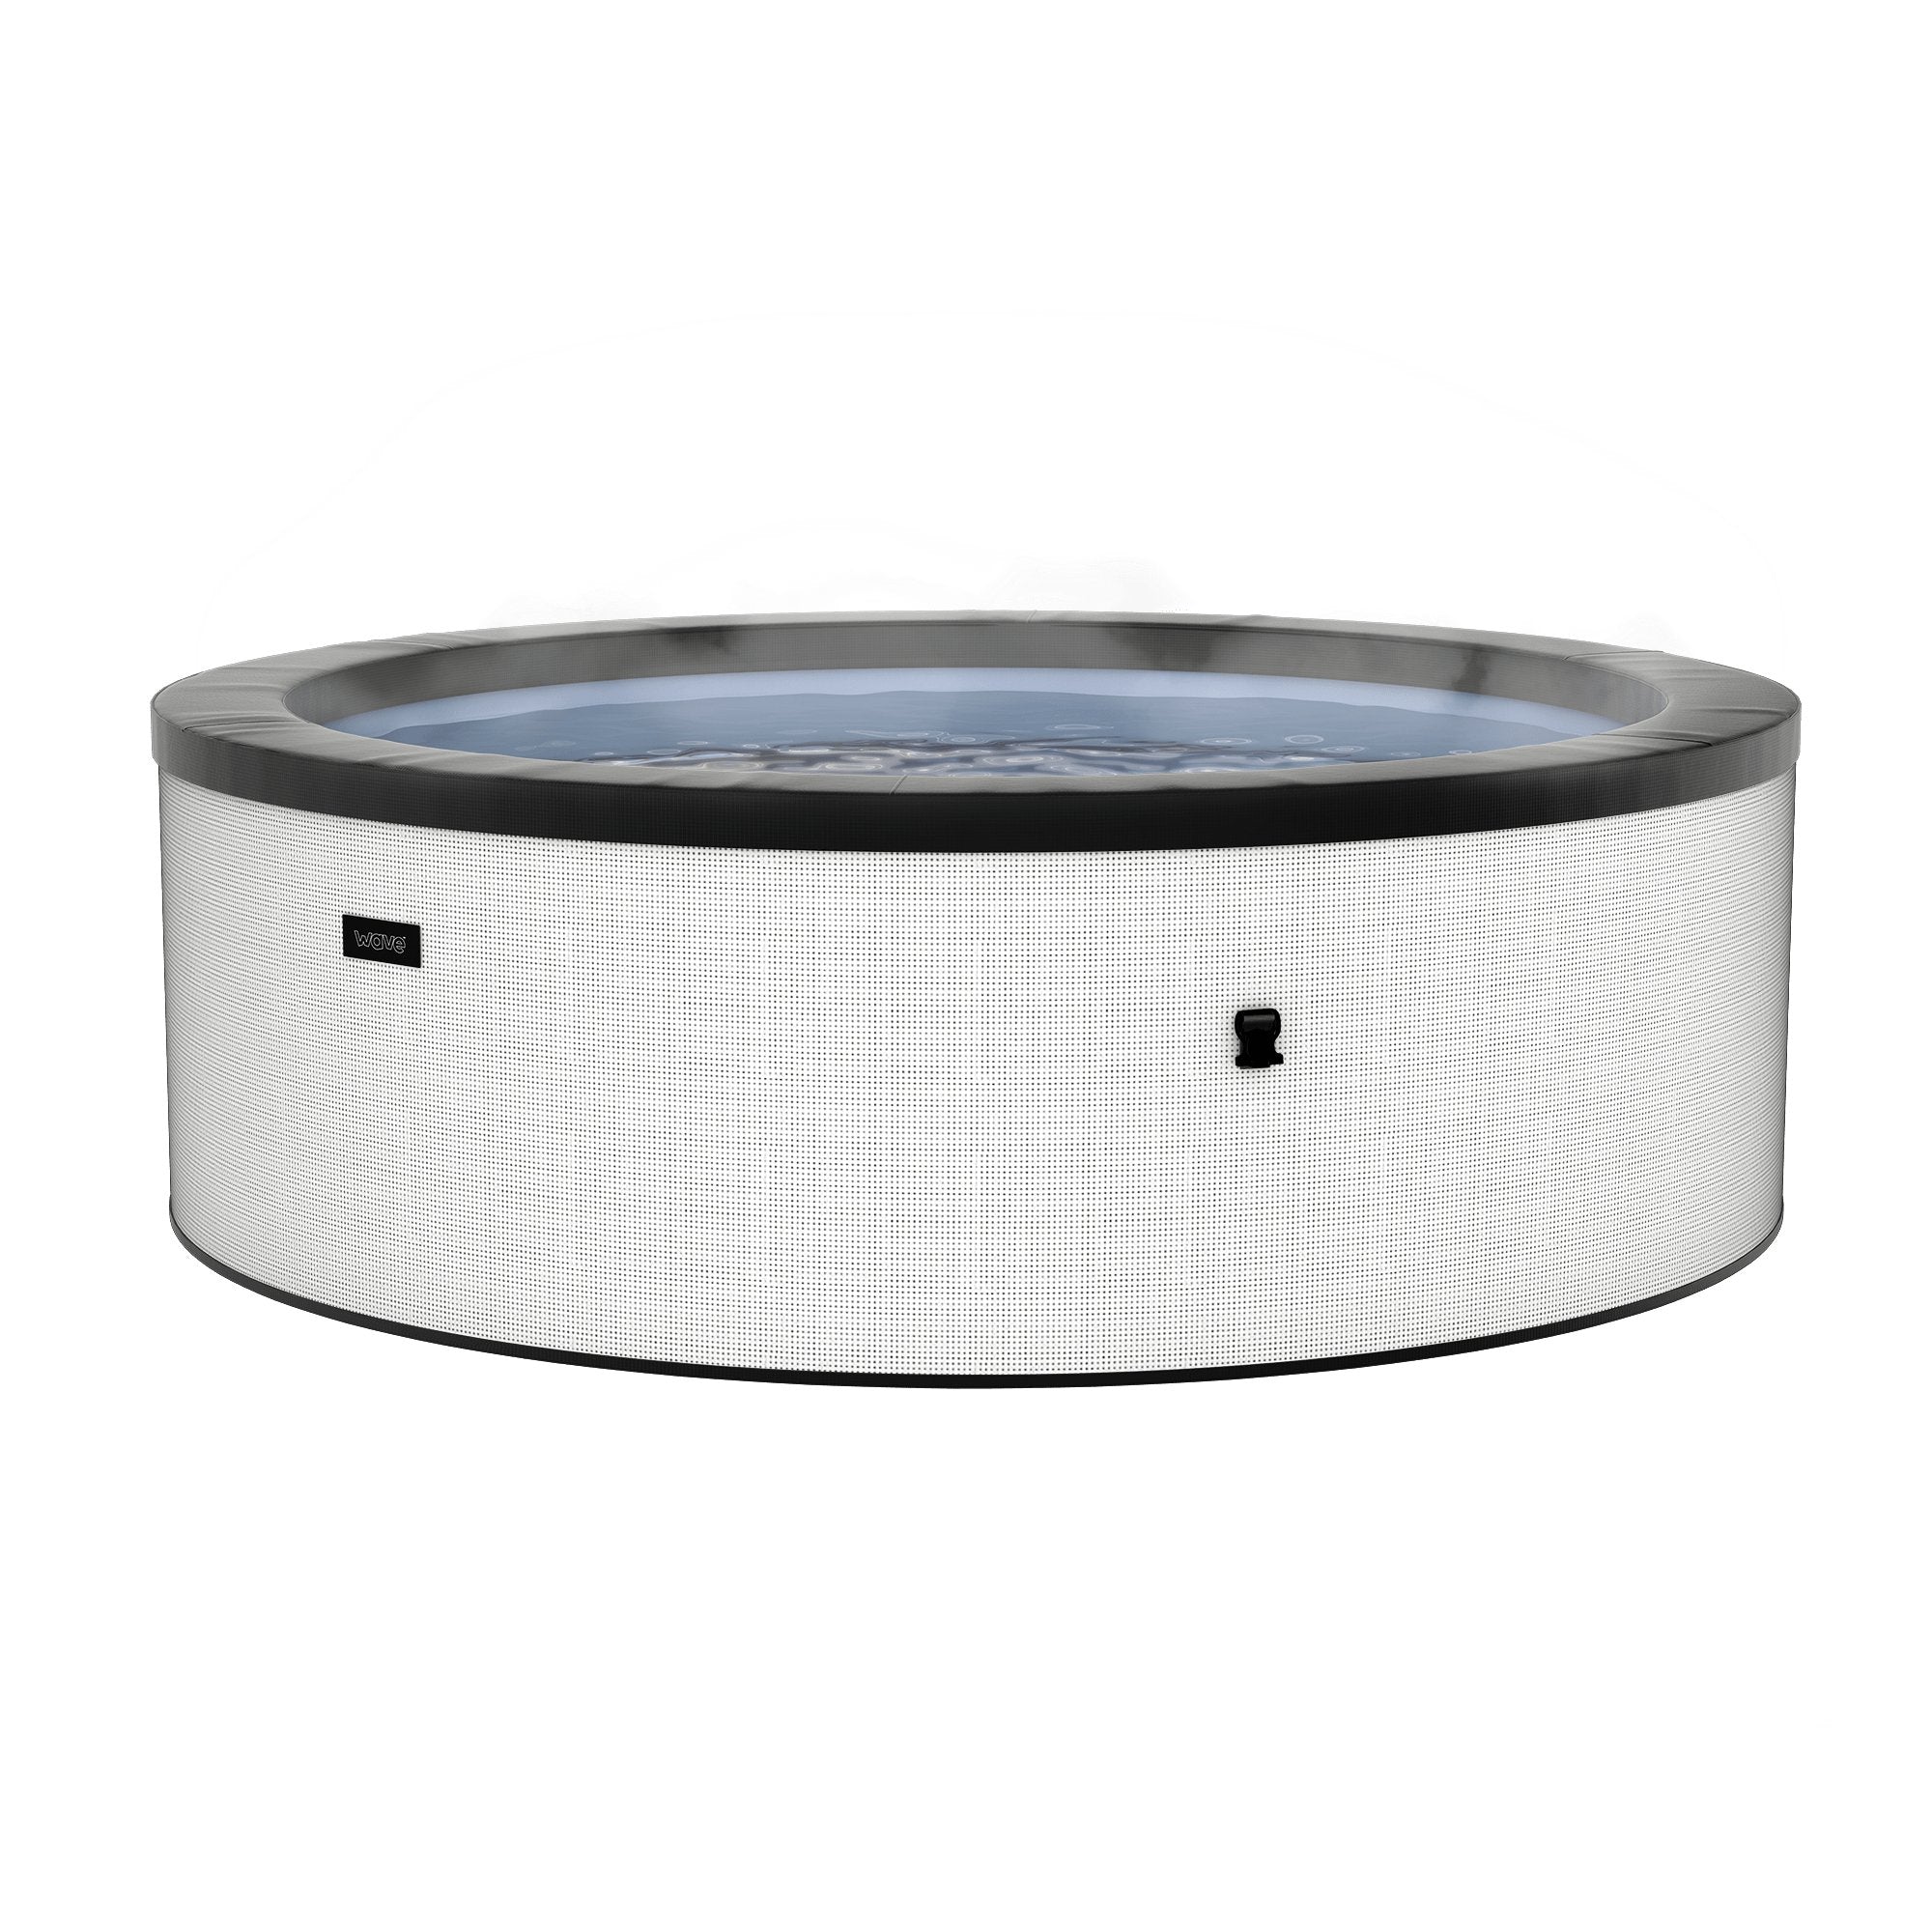 Tahoe v2 | 4/6-Person Eco Foam Hot Tub | Integrated Heater | Pebble White - Wave Spas USA